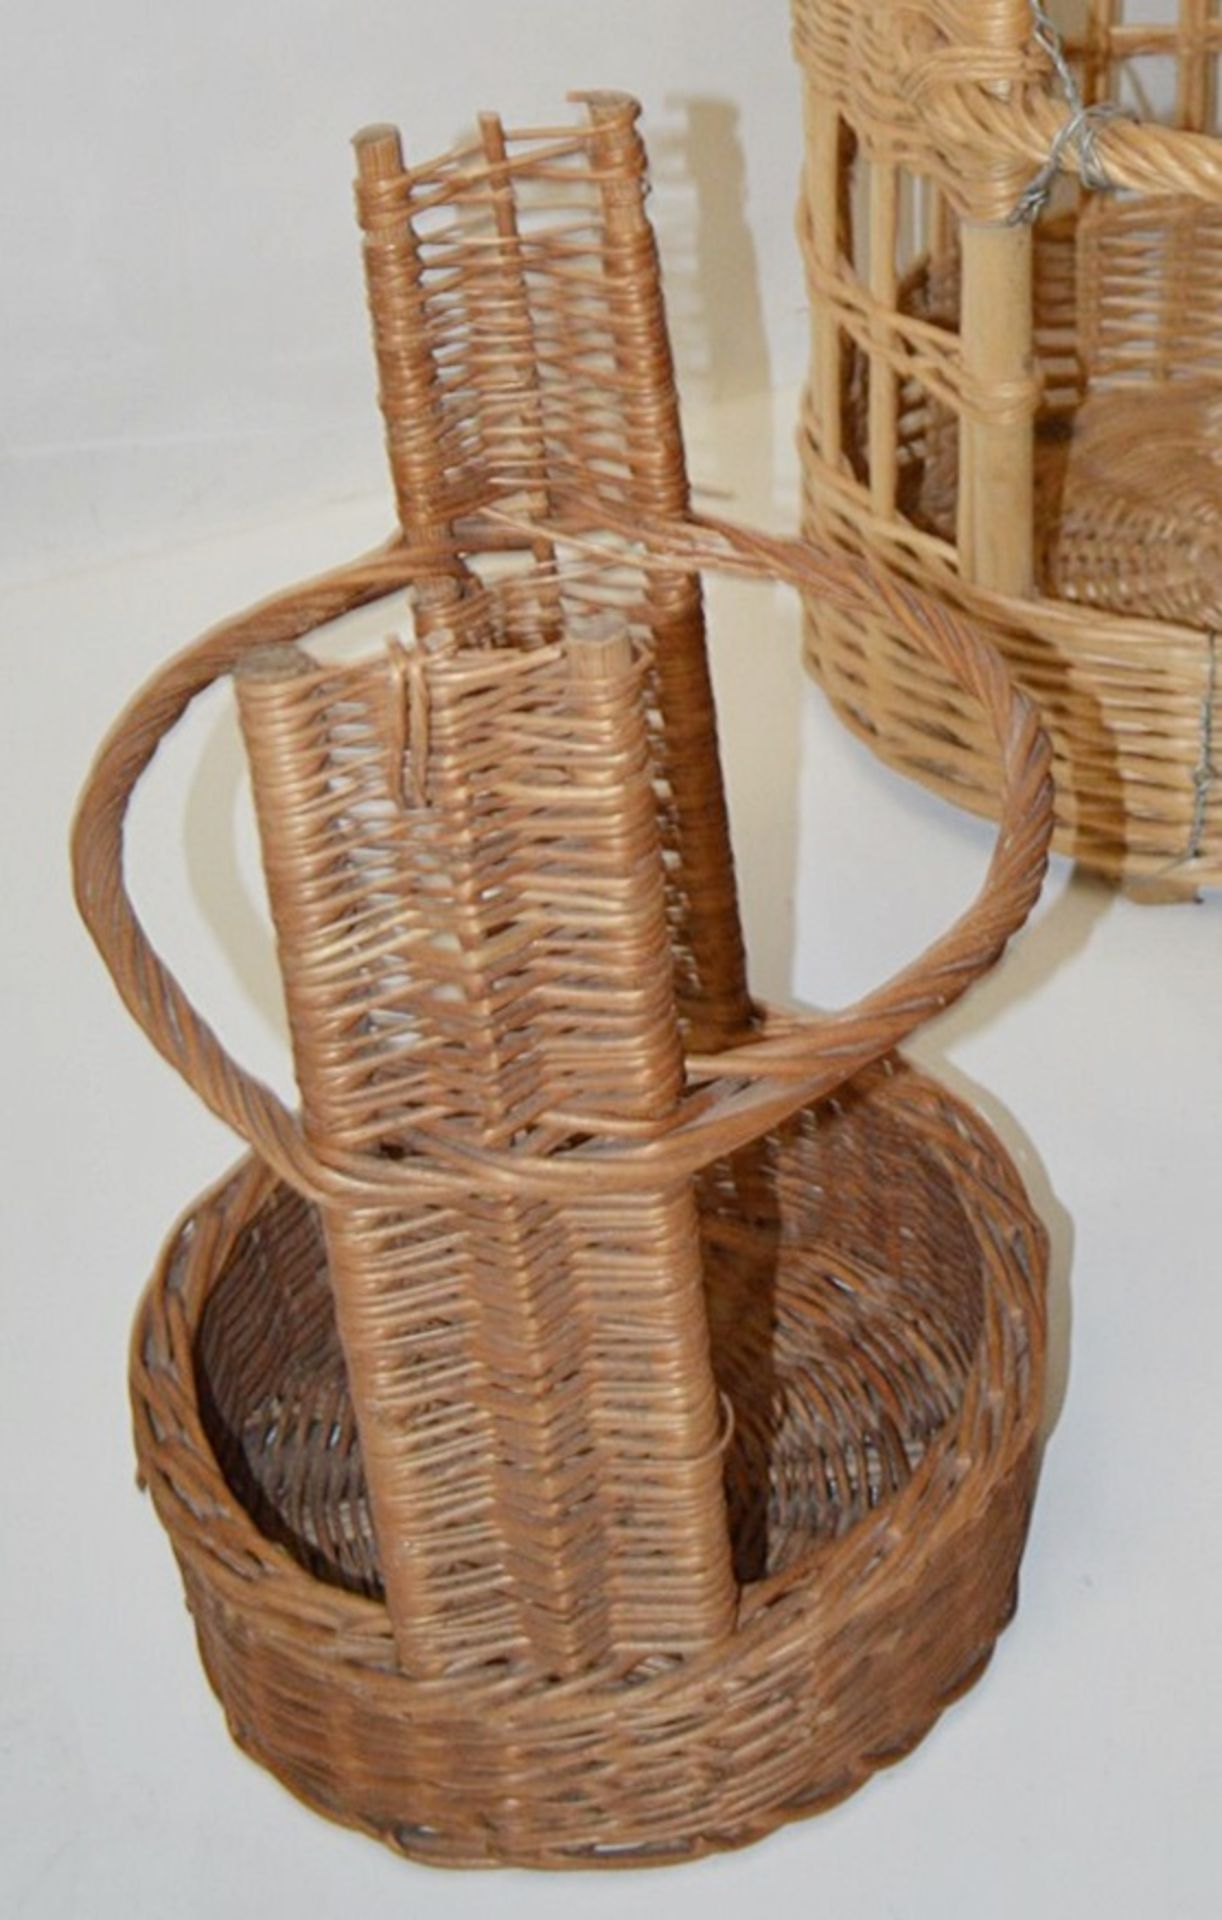 5 x Traditional French Bread Bagette Wicker Baskets - Various Sizes - Ex-Display, Removed From A - Image 2 of 2